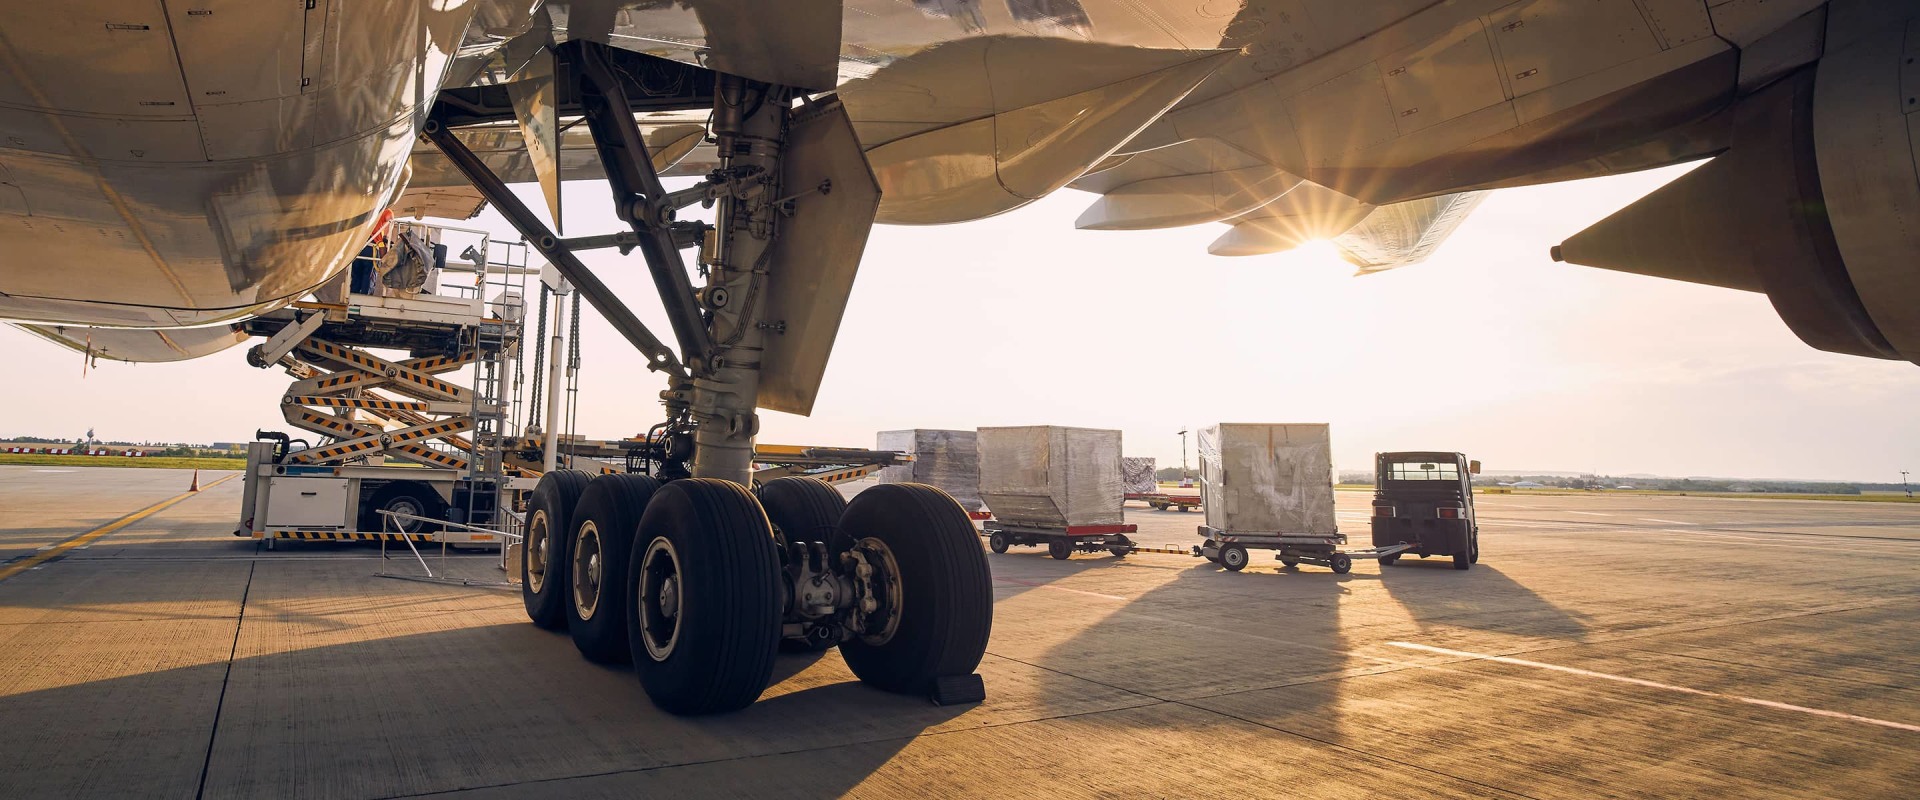 Improvements and Benefits for Travelers: A Comprehensive Look at Air Transport and Shipping